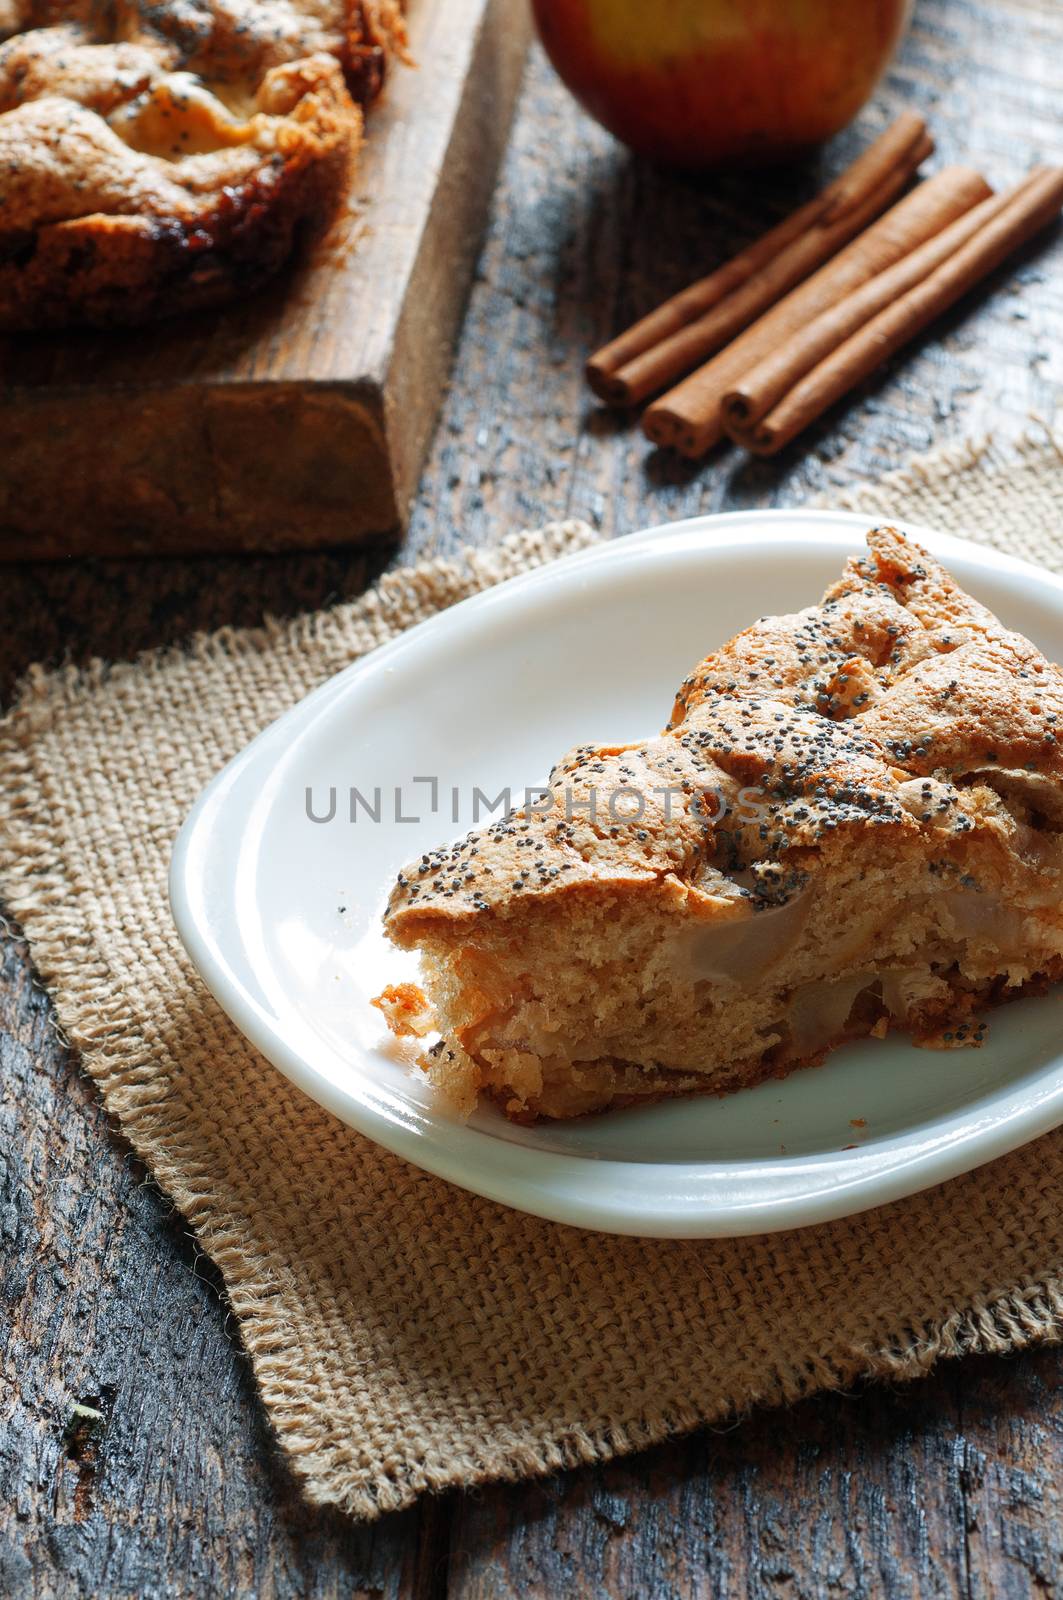 a slice of Apple pie on a wooden table